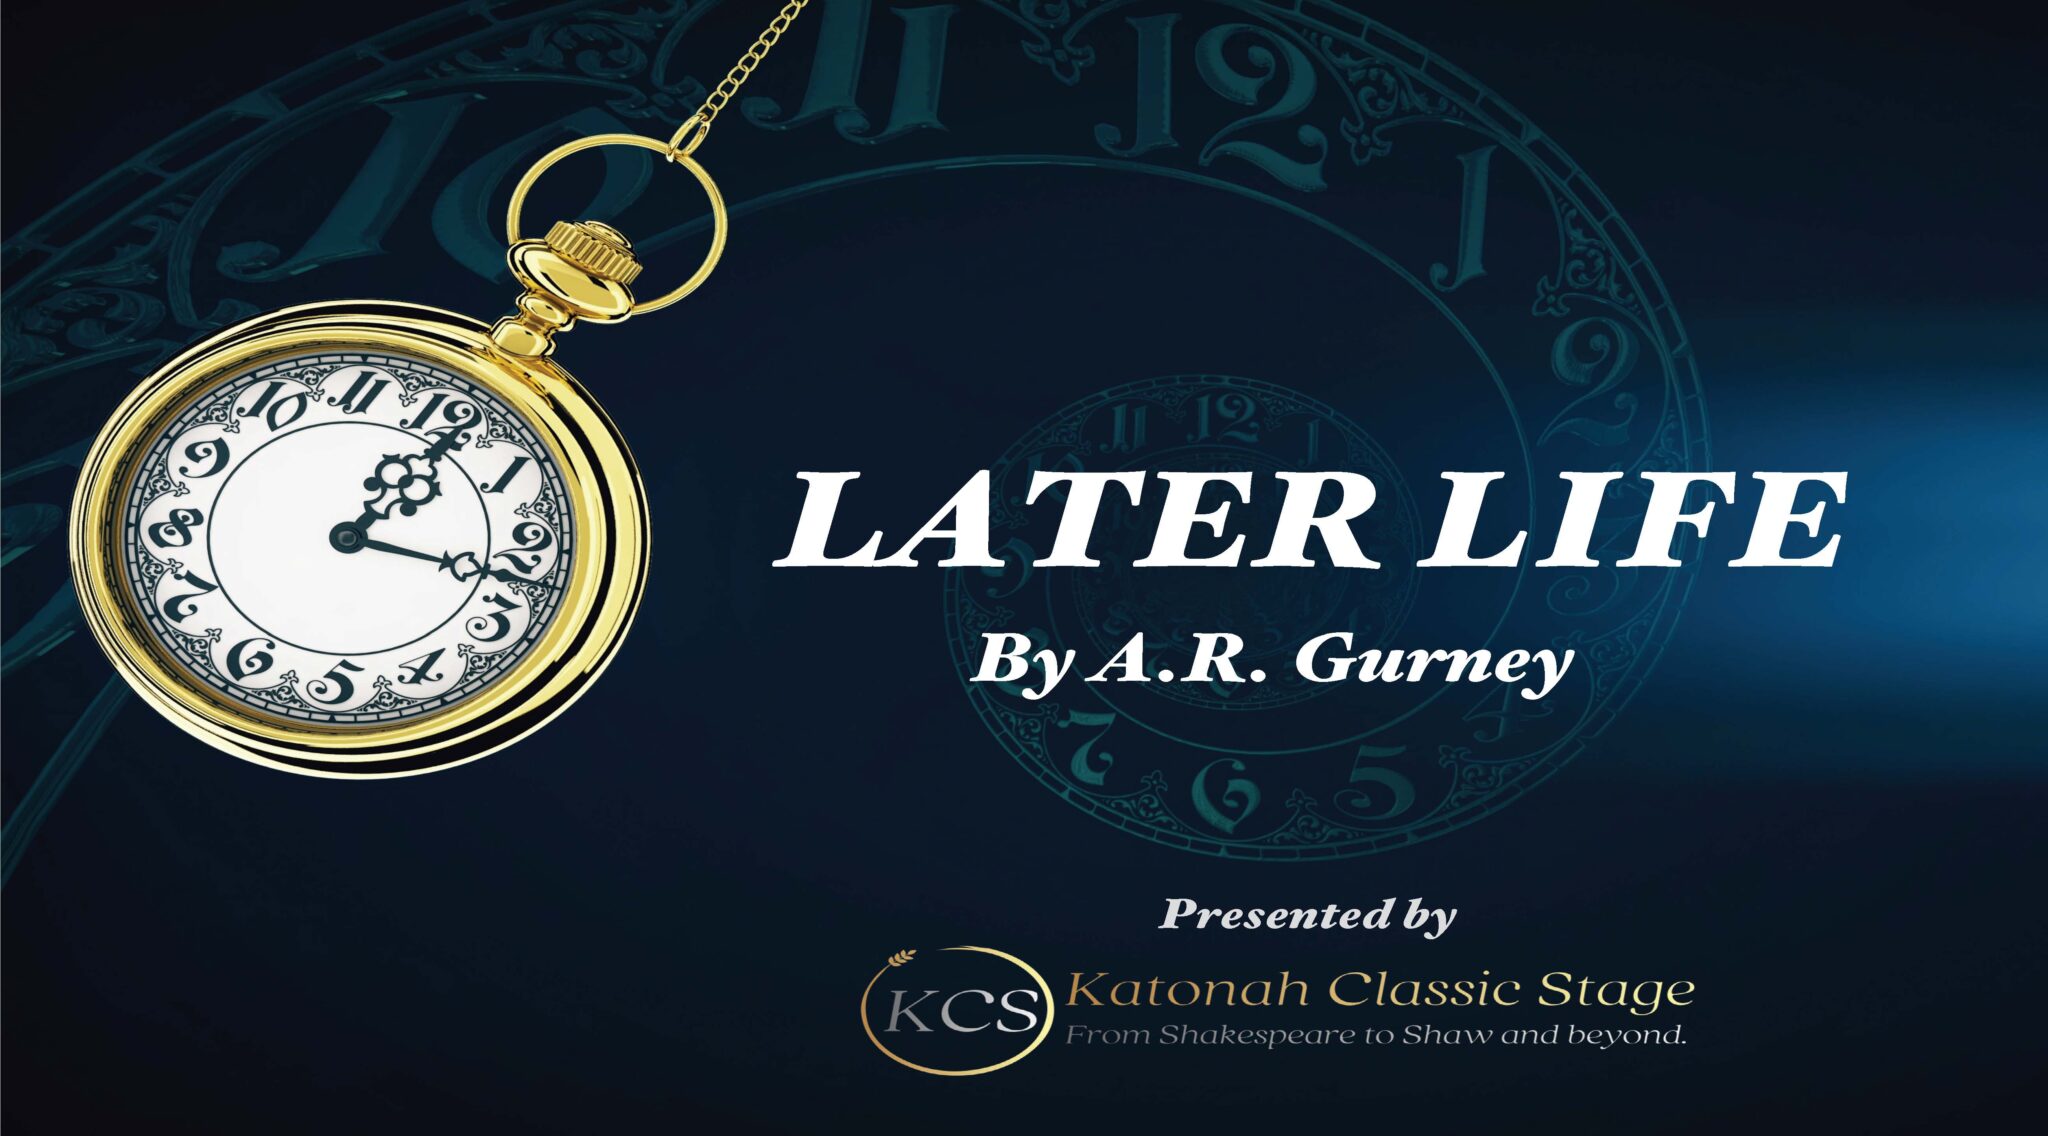 Katonah Classic Stage presents A.R. Gurney's Later Life in Armonk